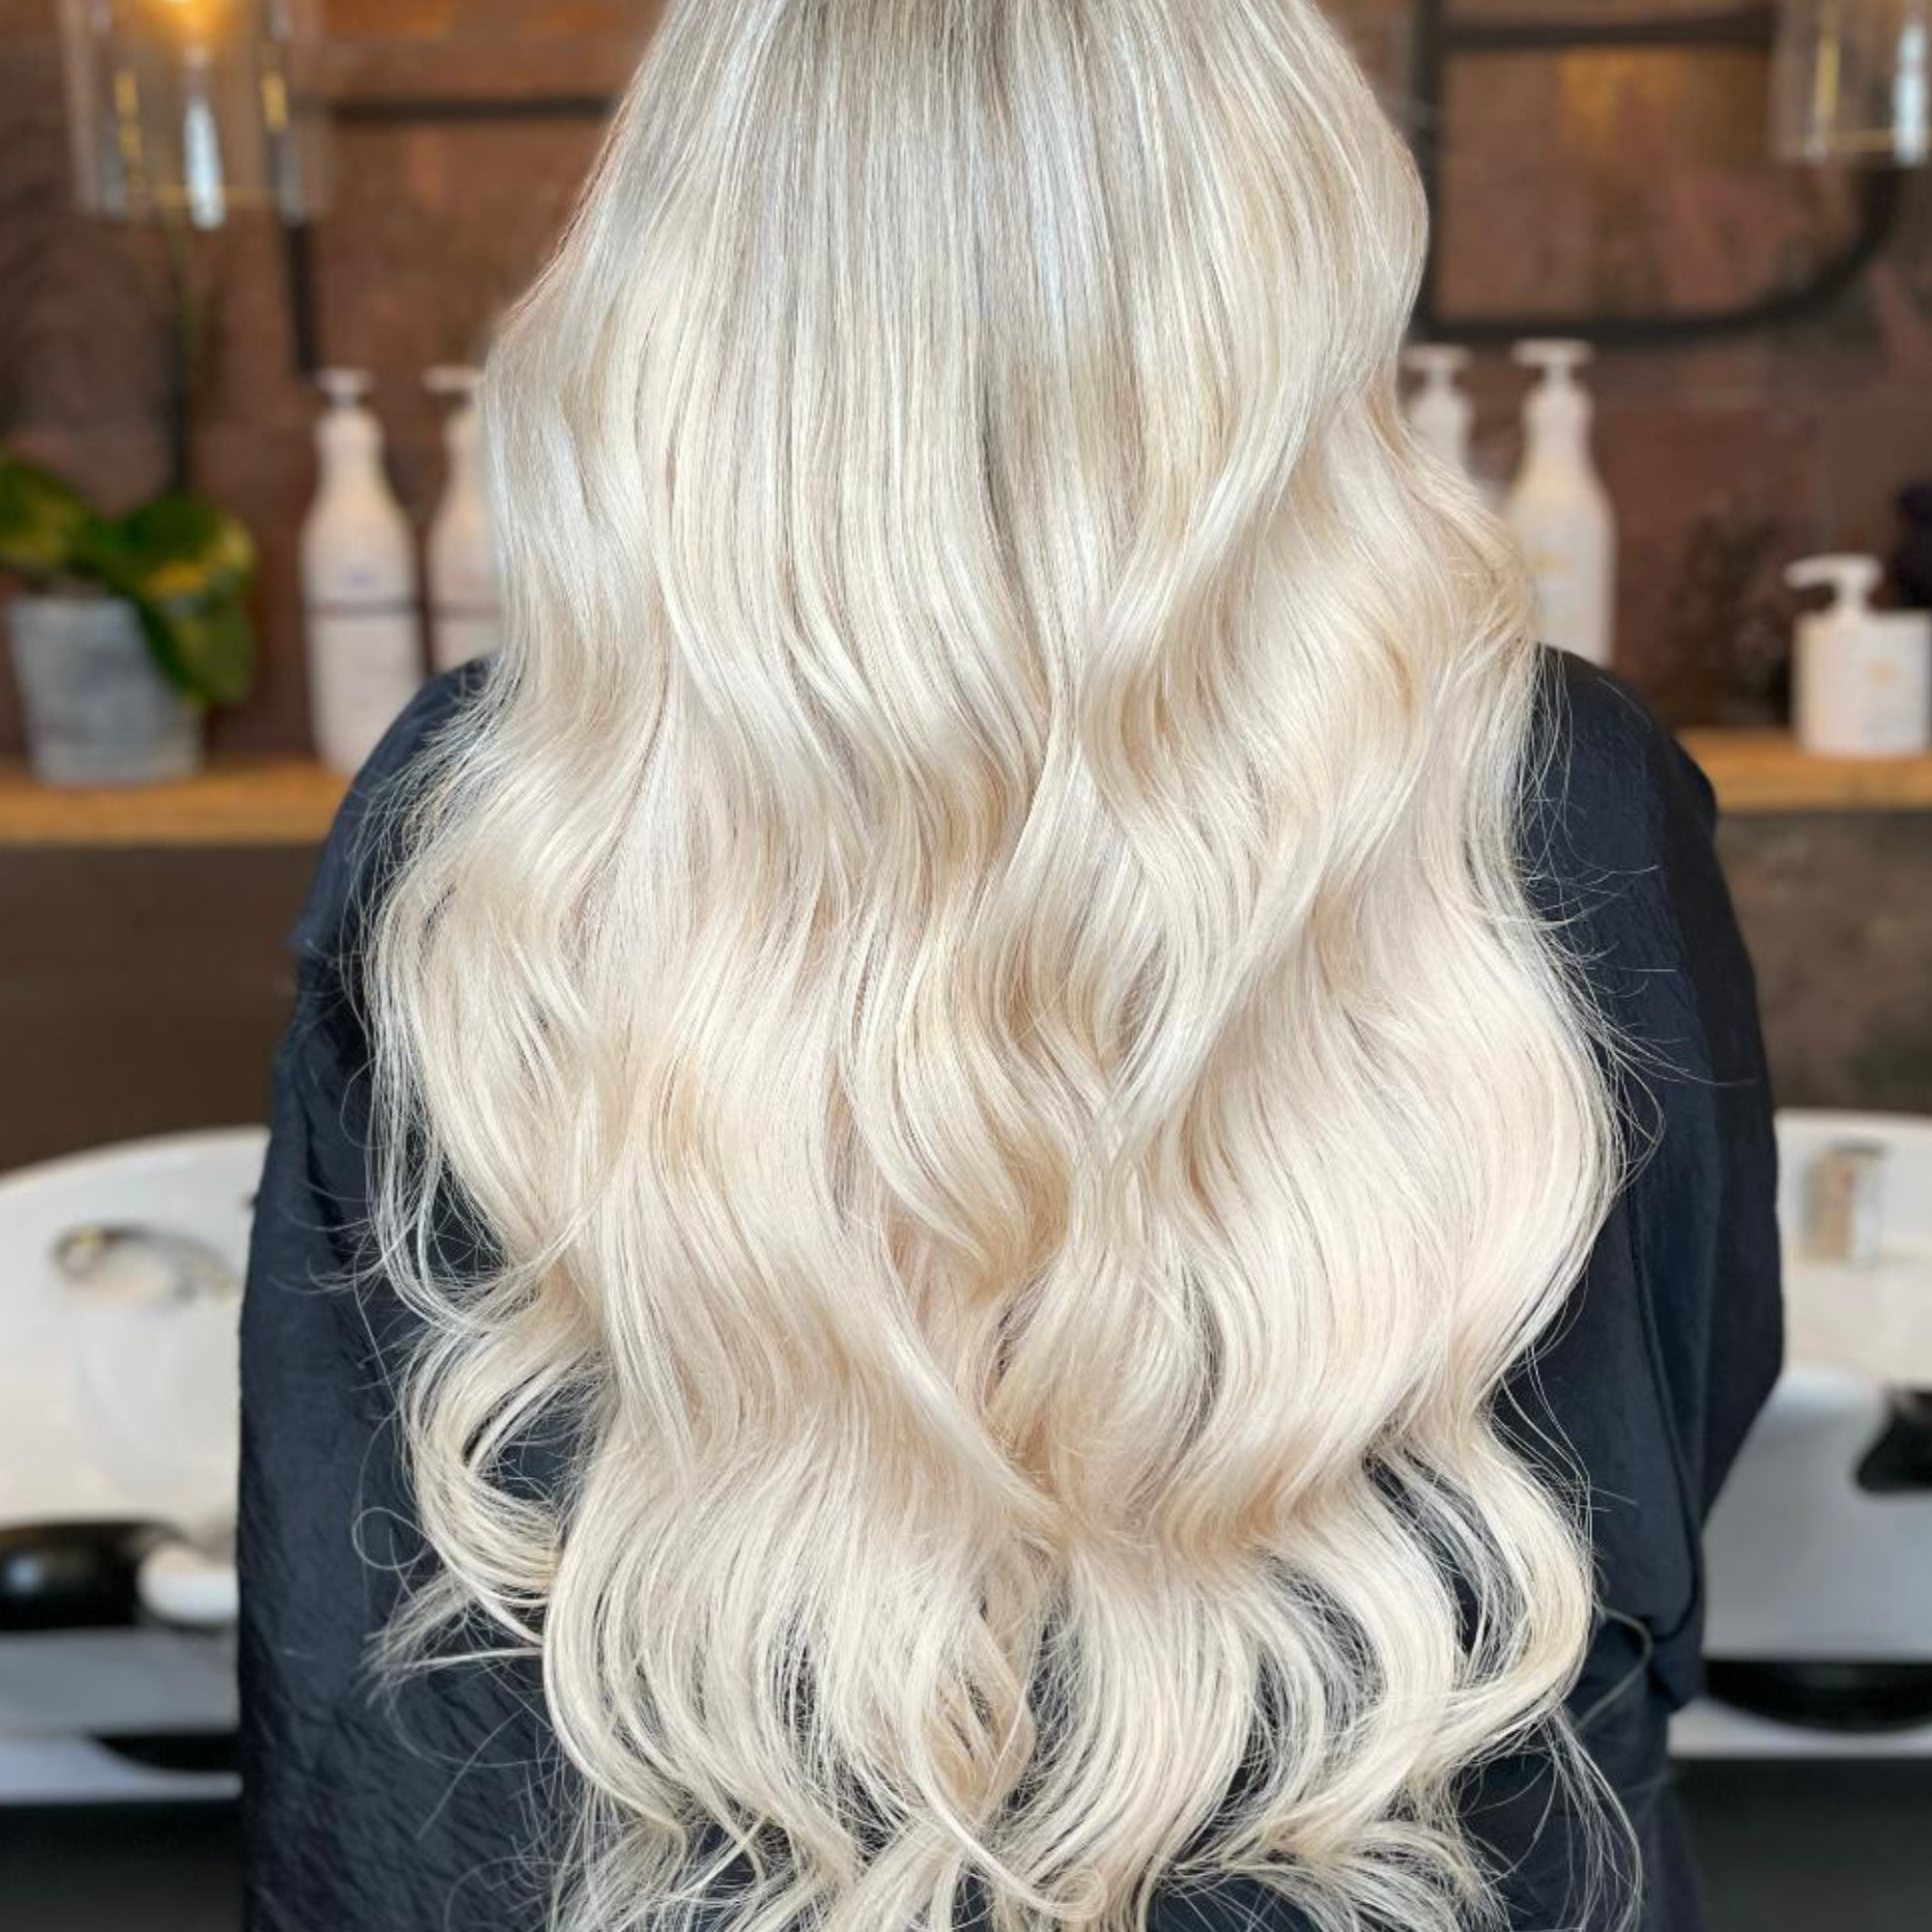 18" Invisible Tape Extensions Ice Blonde